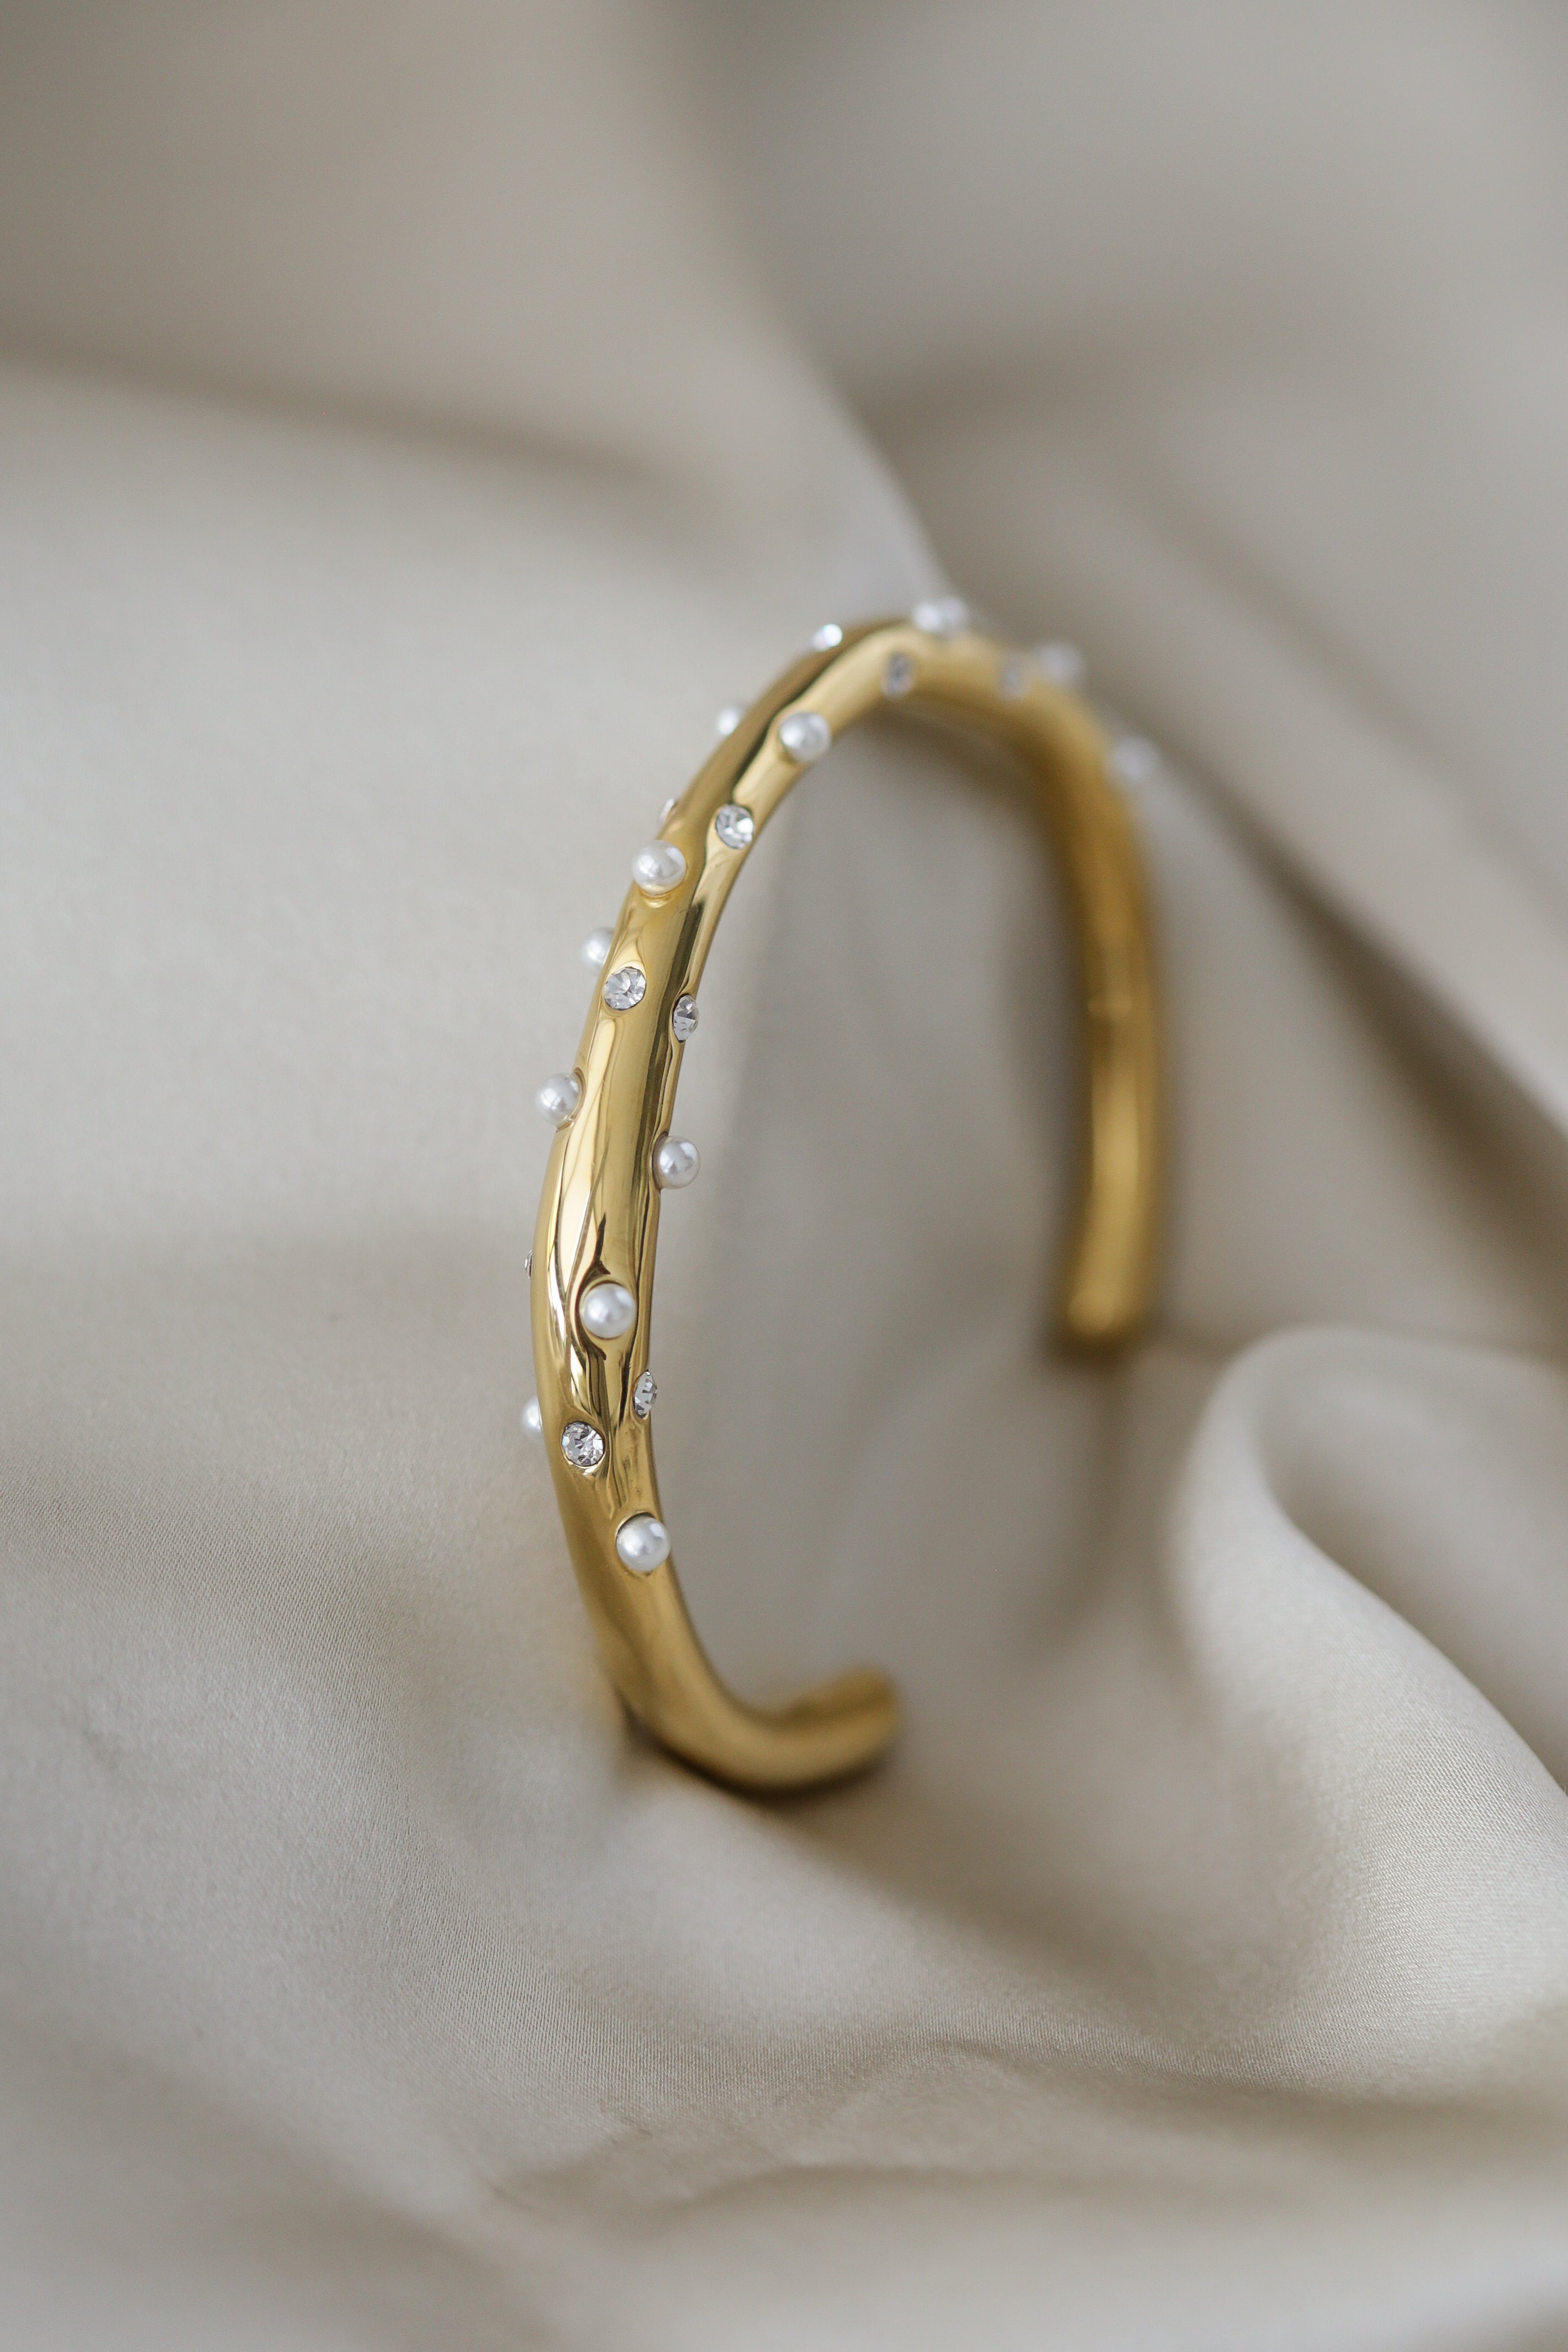 Xanthe Cuff - Boutique Minimaliste has waterproof, durable, elegant and vintage inspired jewelry